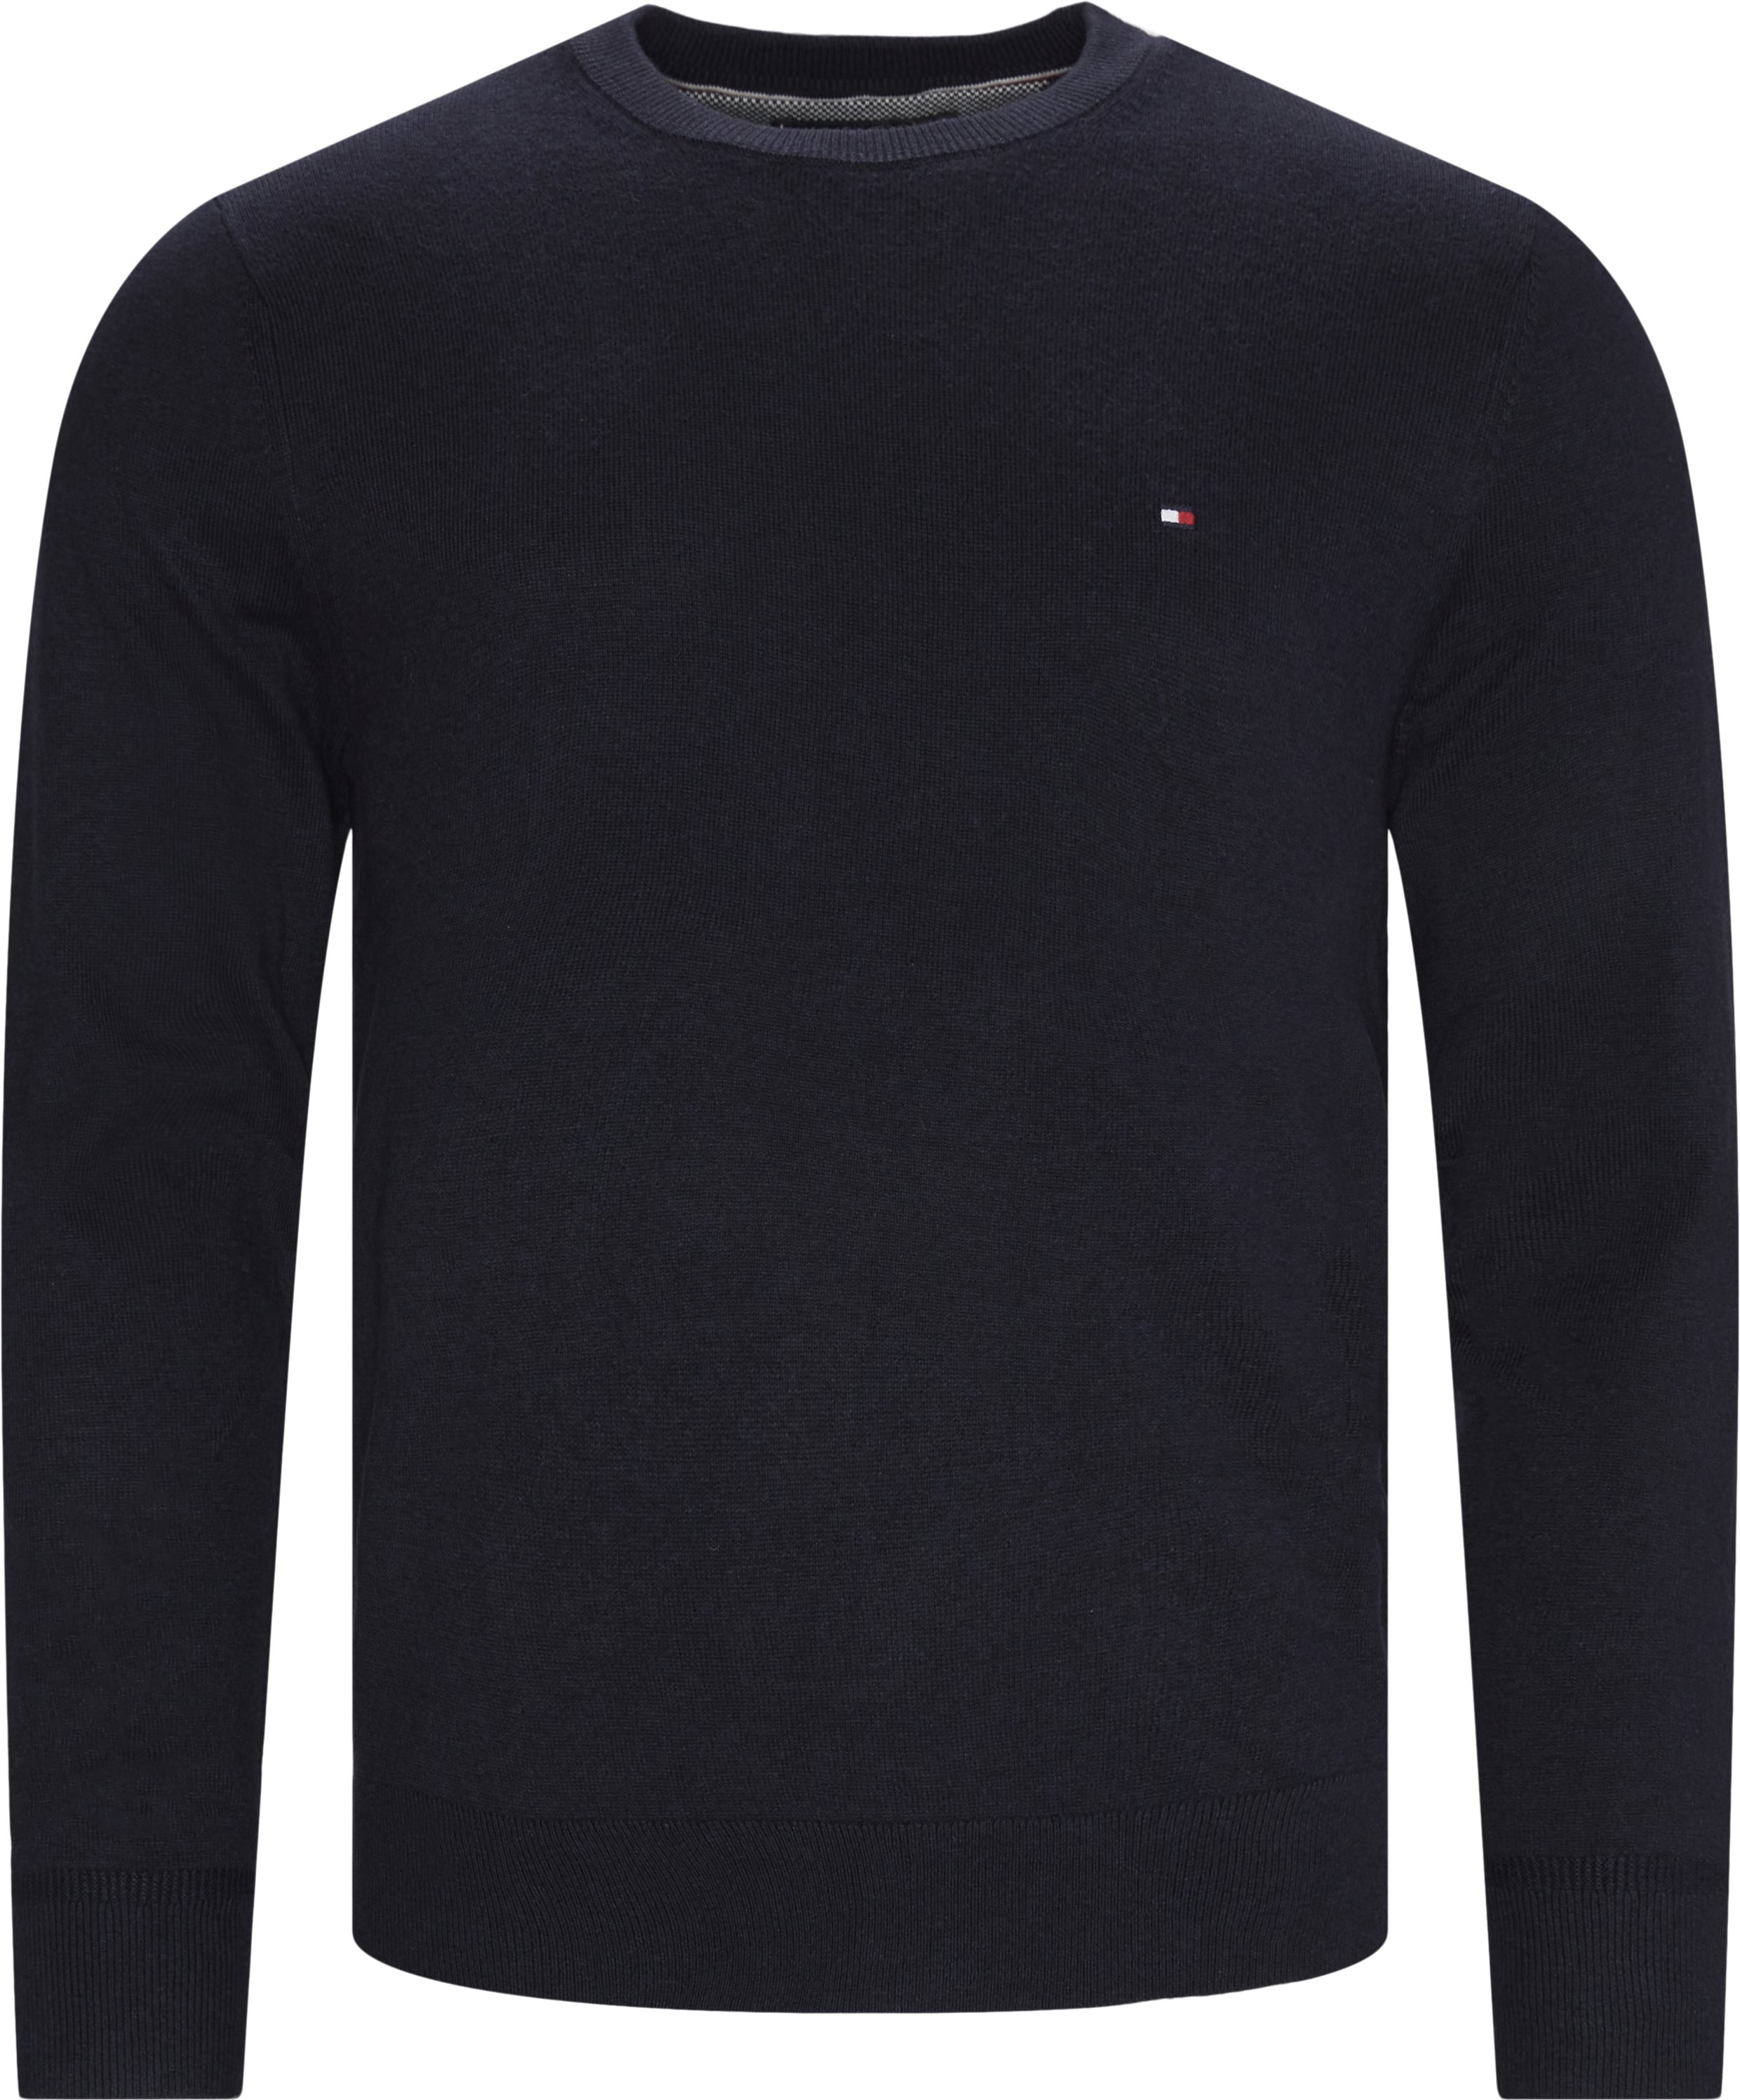 COTTON Tommy 11674 PIMA Hilfiger EUR 60 Knitwear NAVY from CASHMERE